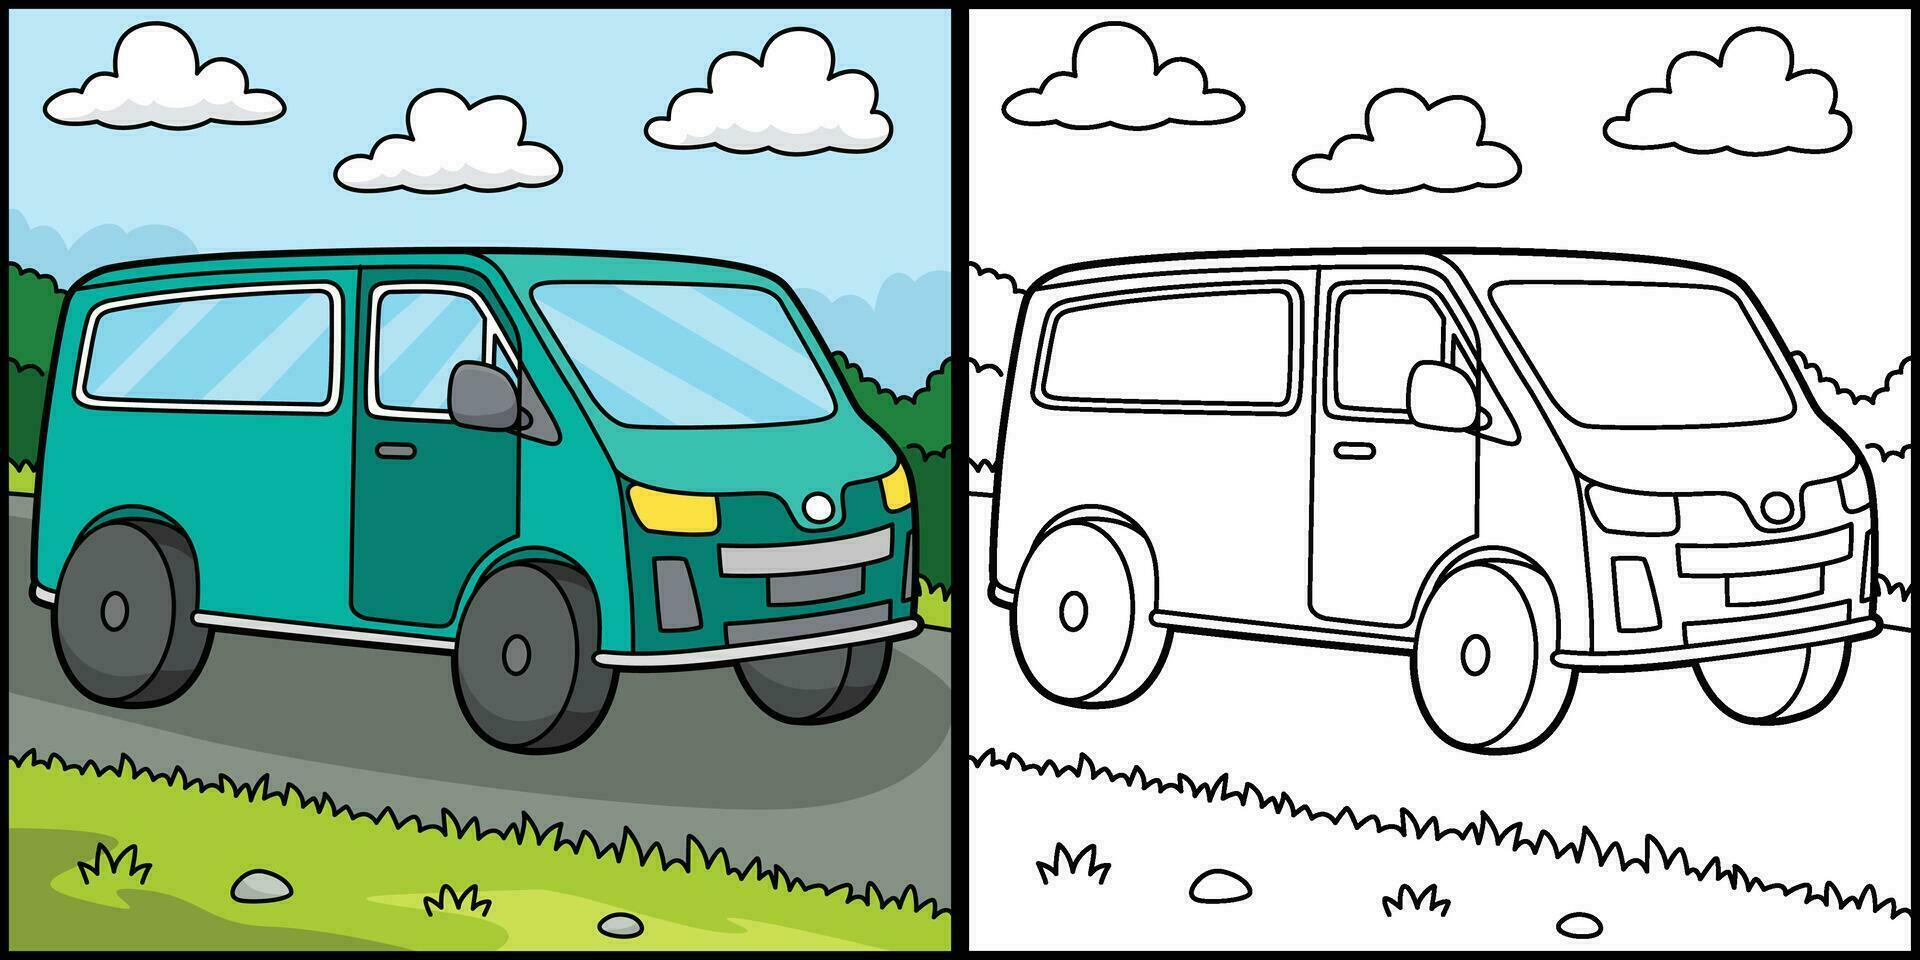 Van Vehicle Coloring Page Colored Illustration vector